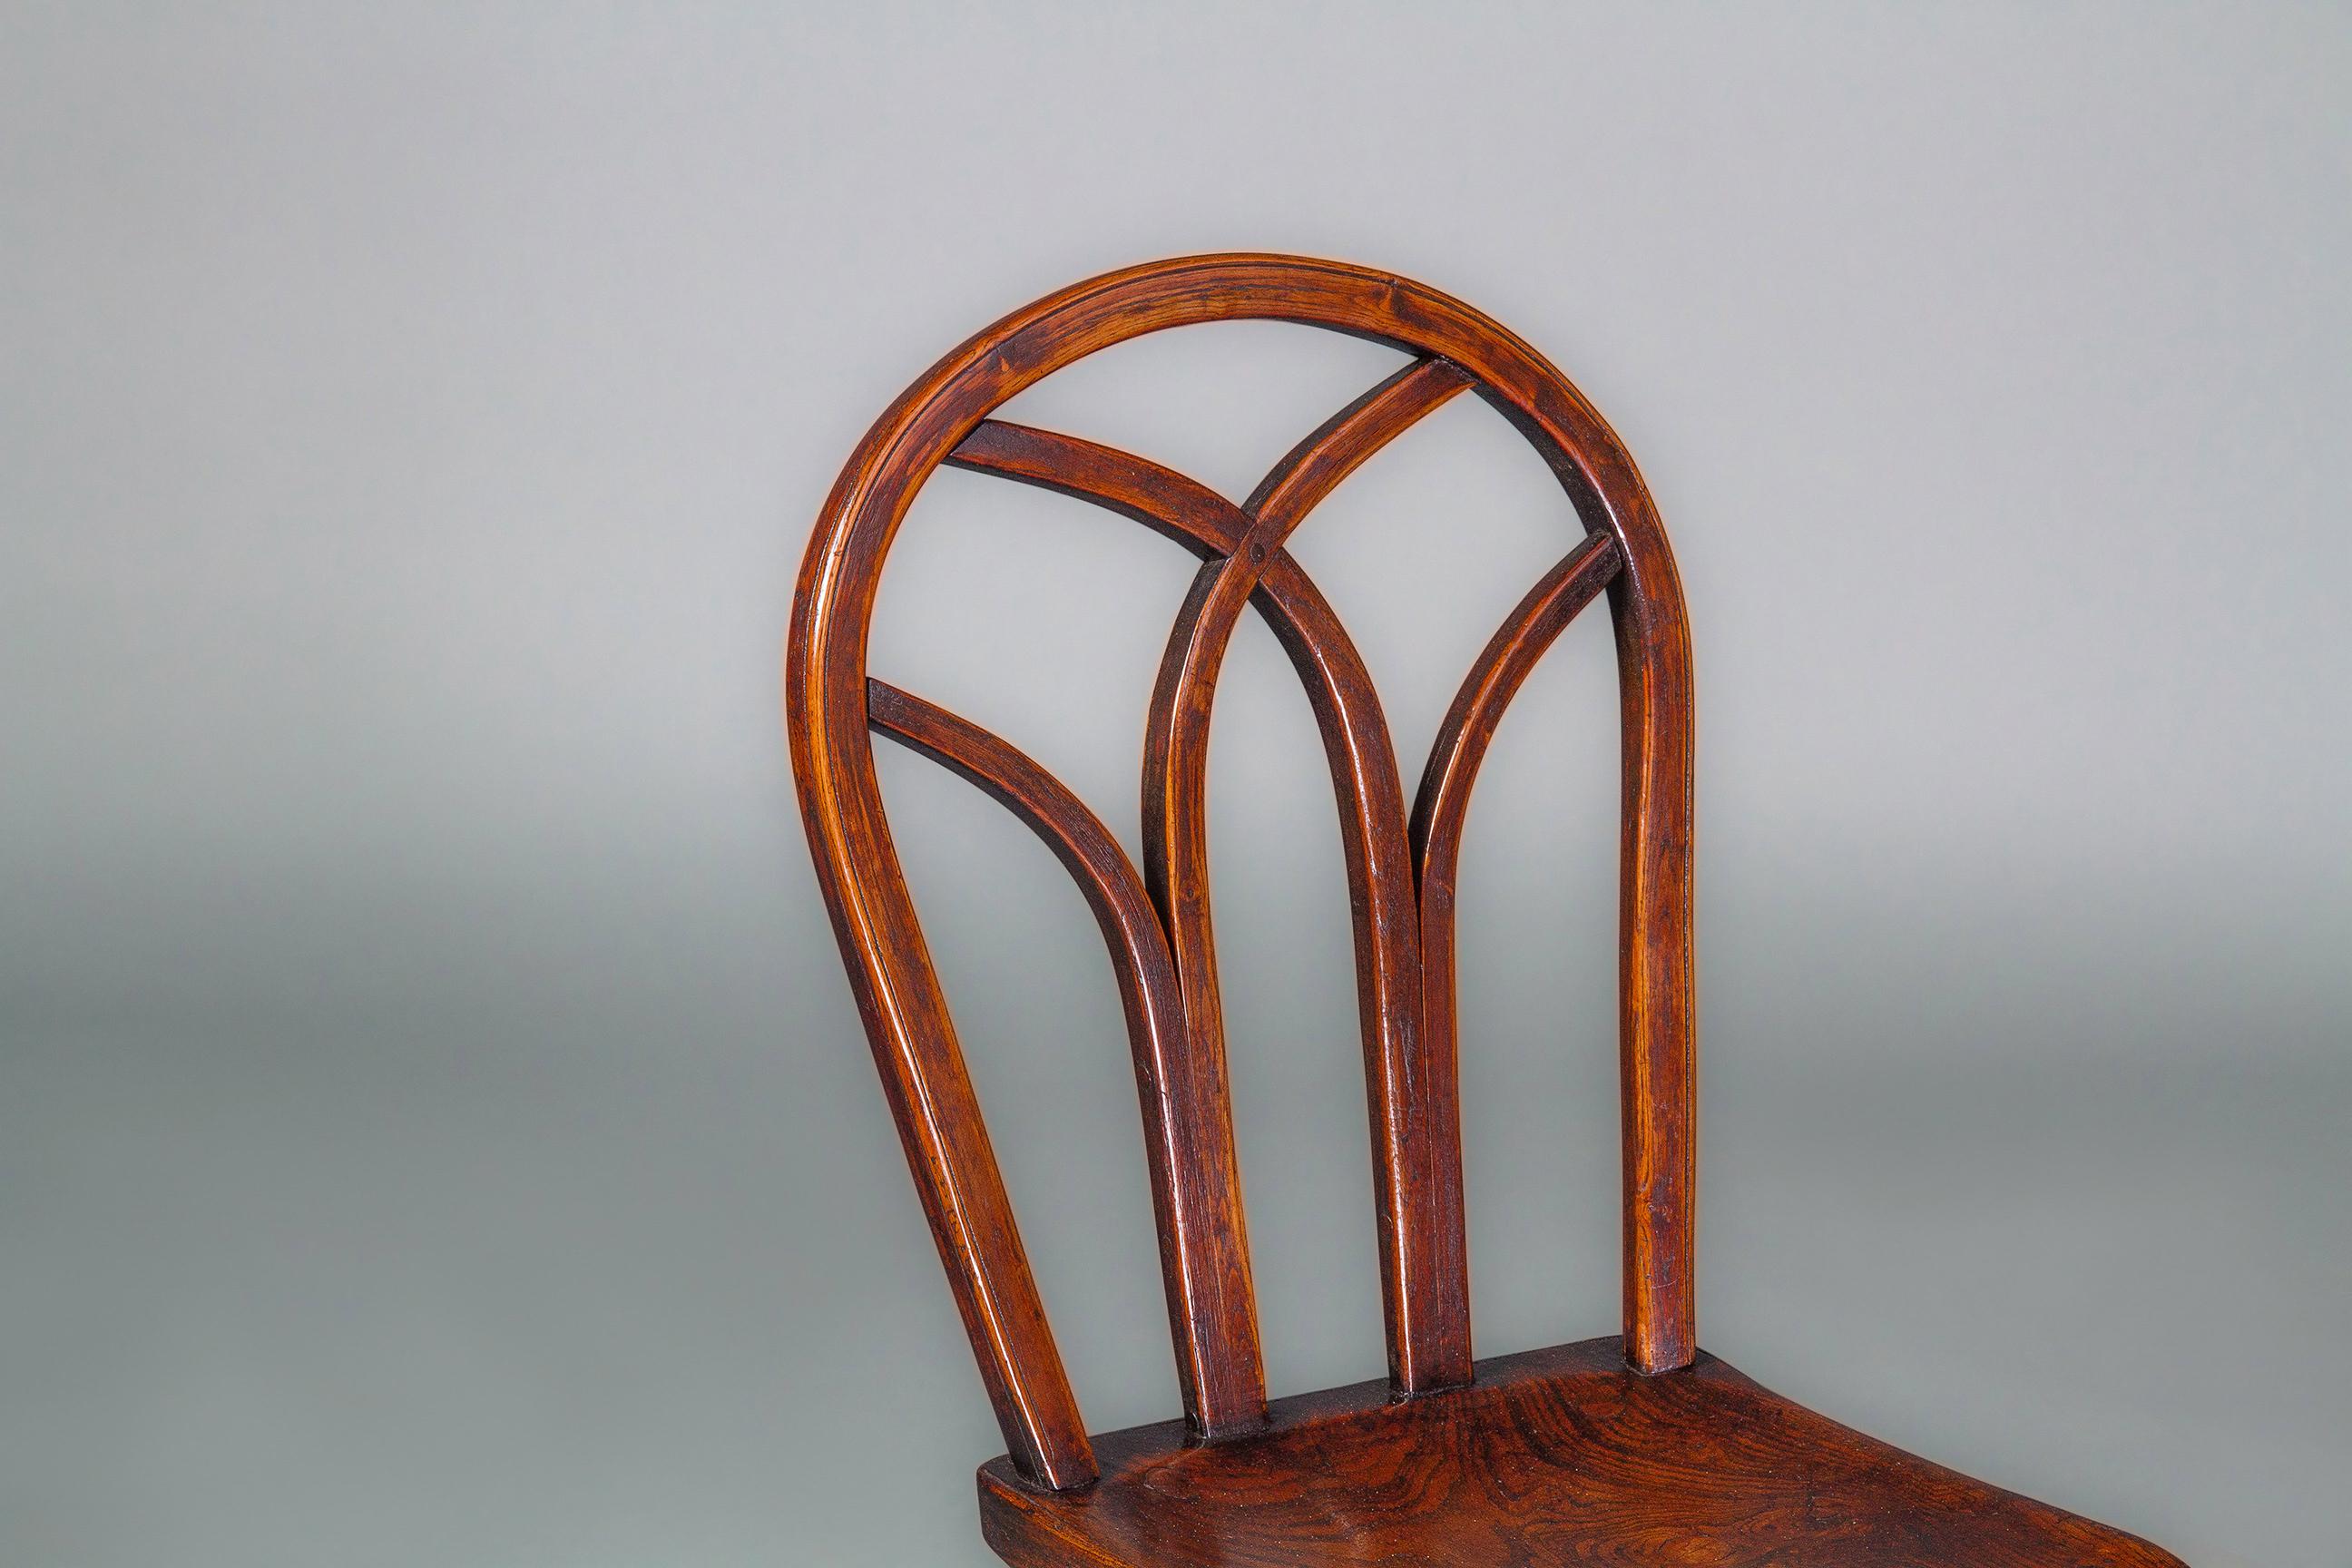 This modified Gothic style of Windsor chairs is attributed to the Buckinghamshire area of the Thames Valley and examples are known from circa 1790 through the first half of the 19th century. Although some are found with crinoline stretchers, these